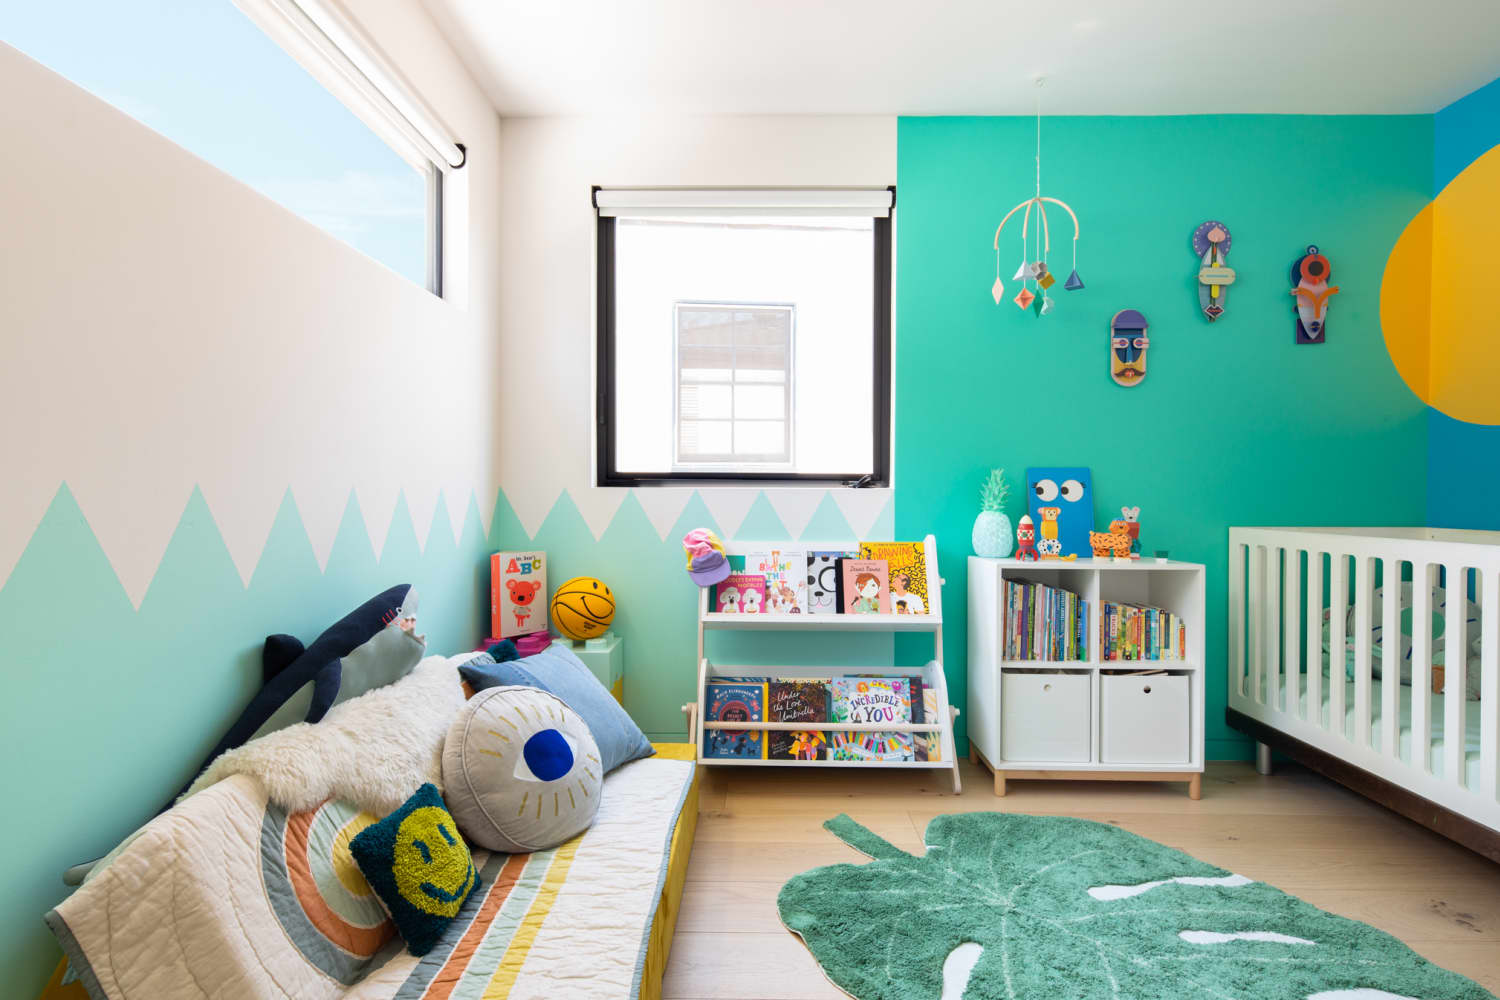 A $400 DIY Mural Is the Star of This LA Kid’s Room